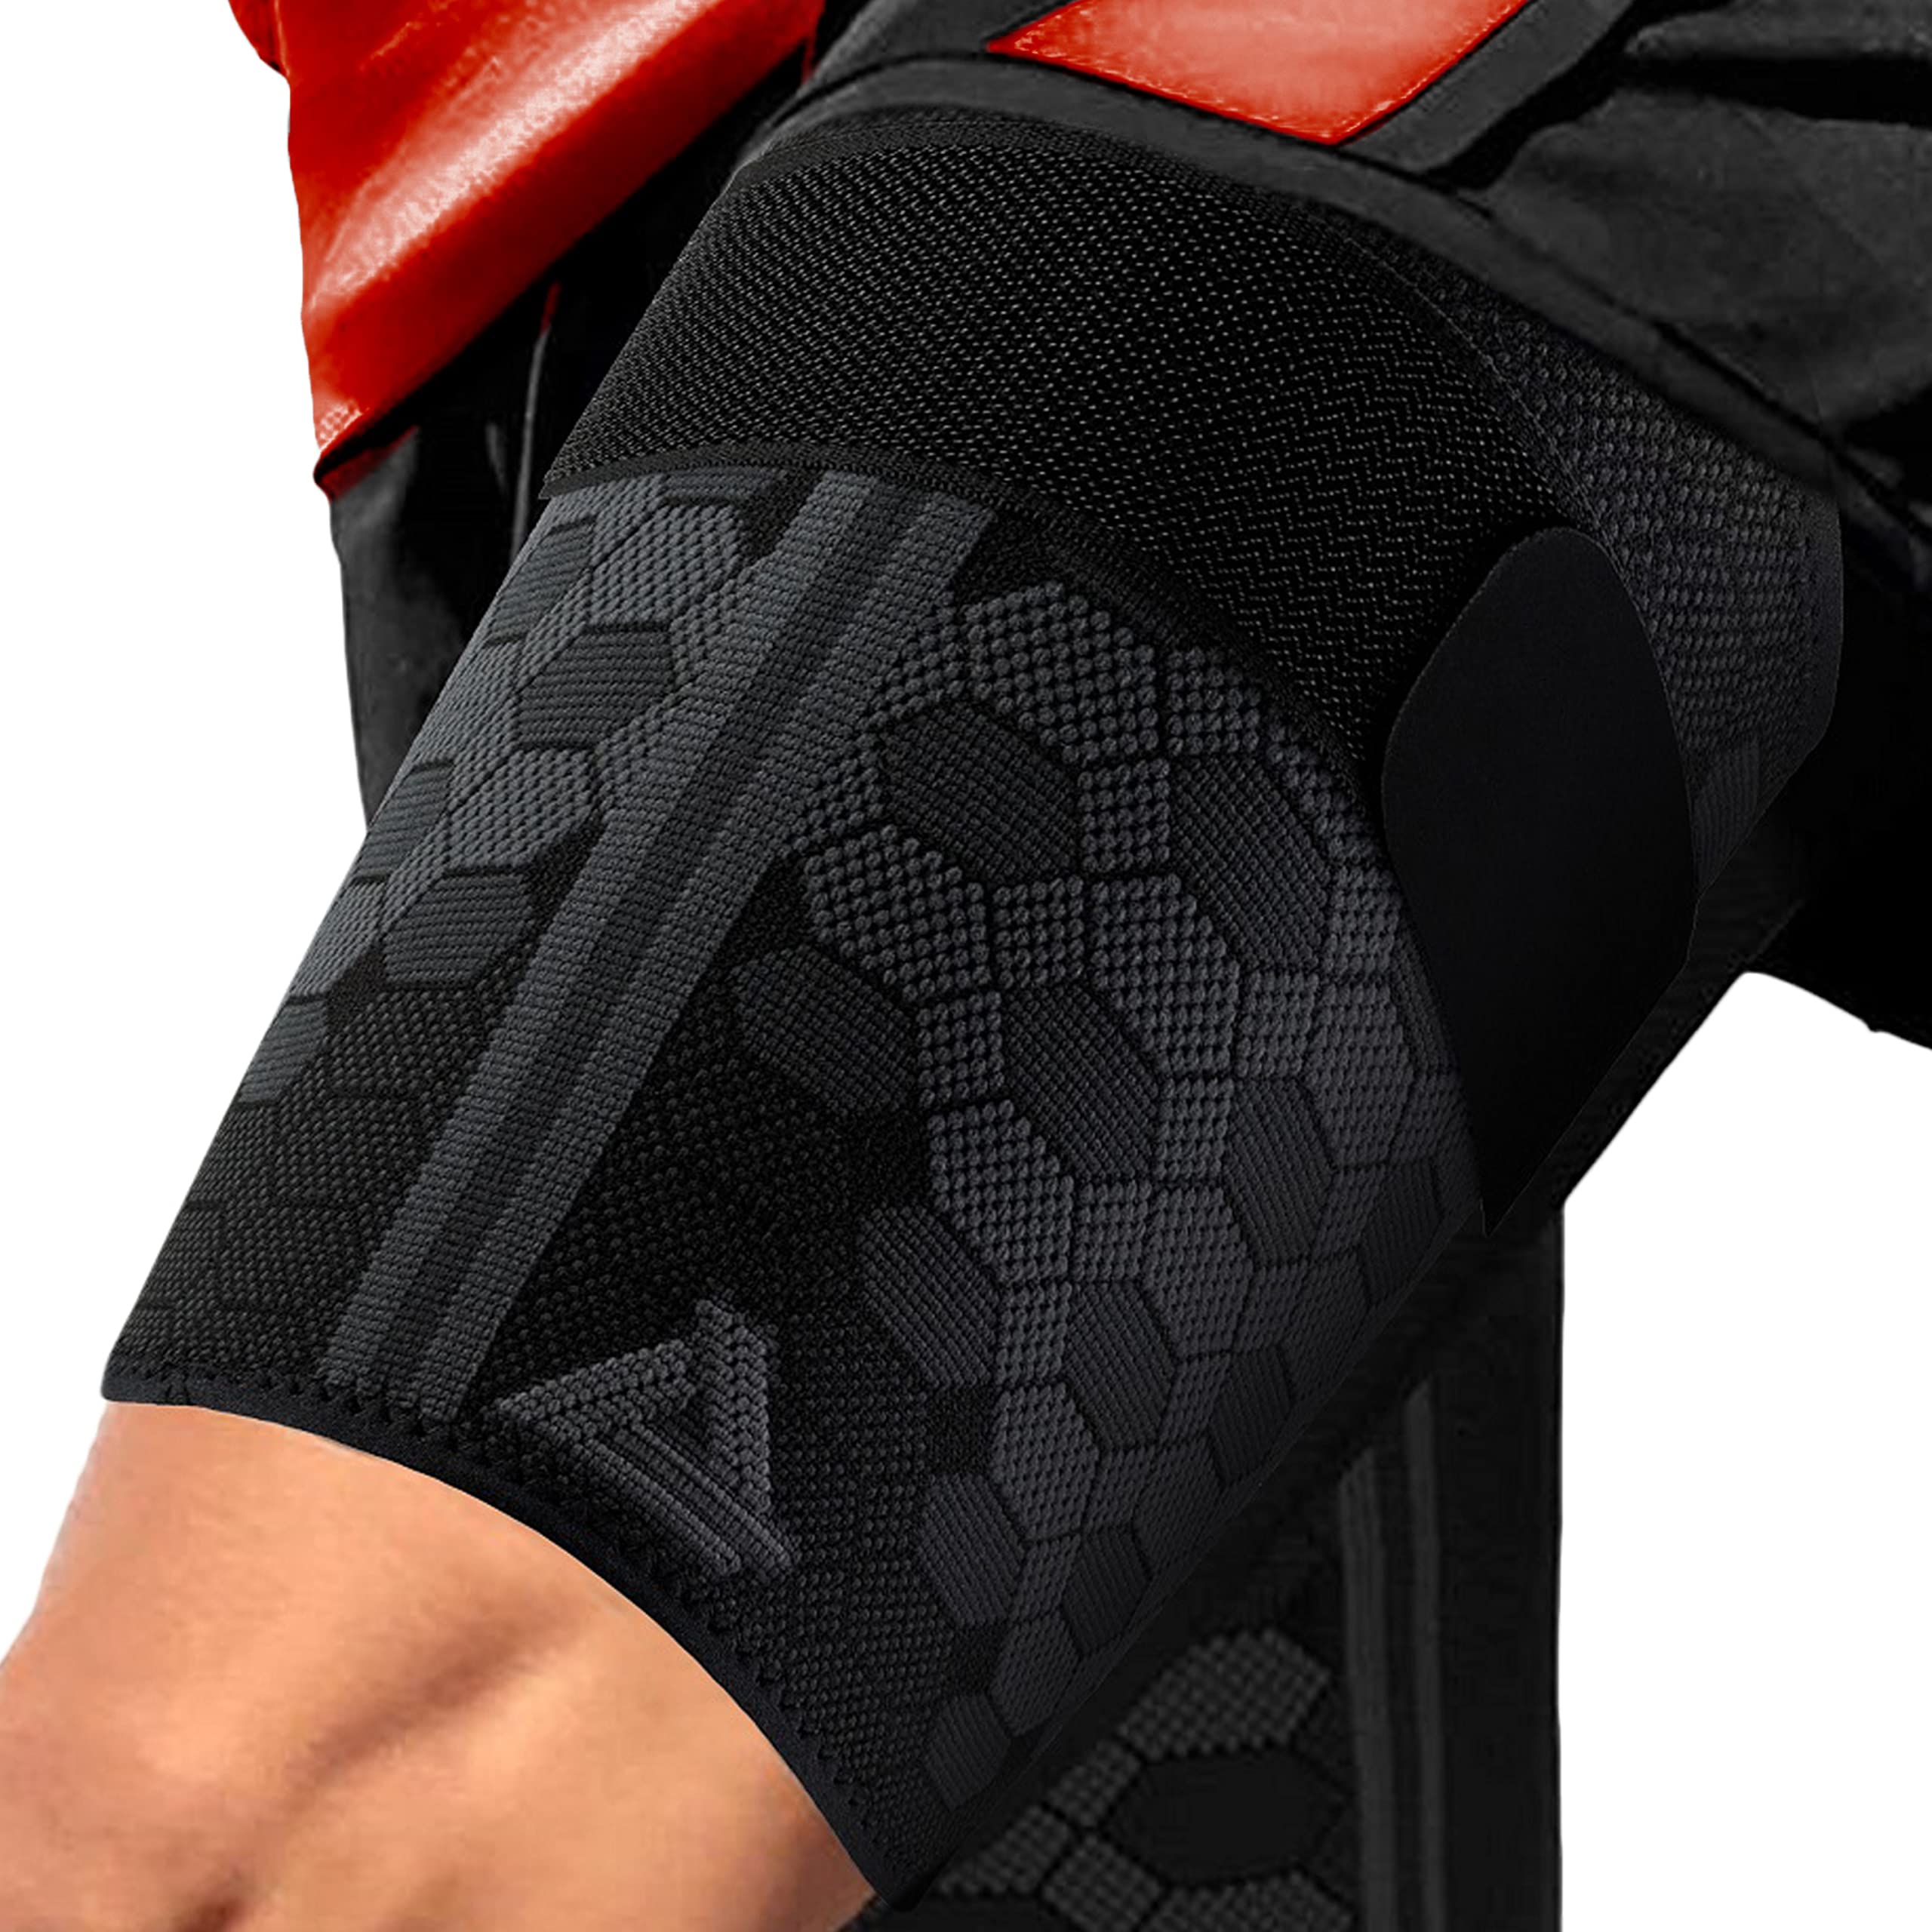 Thigh compression support